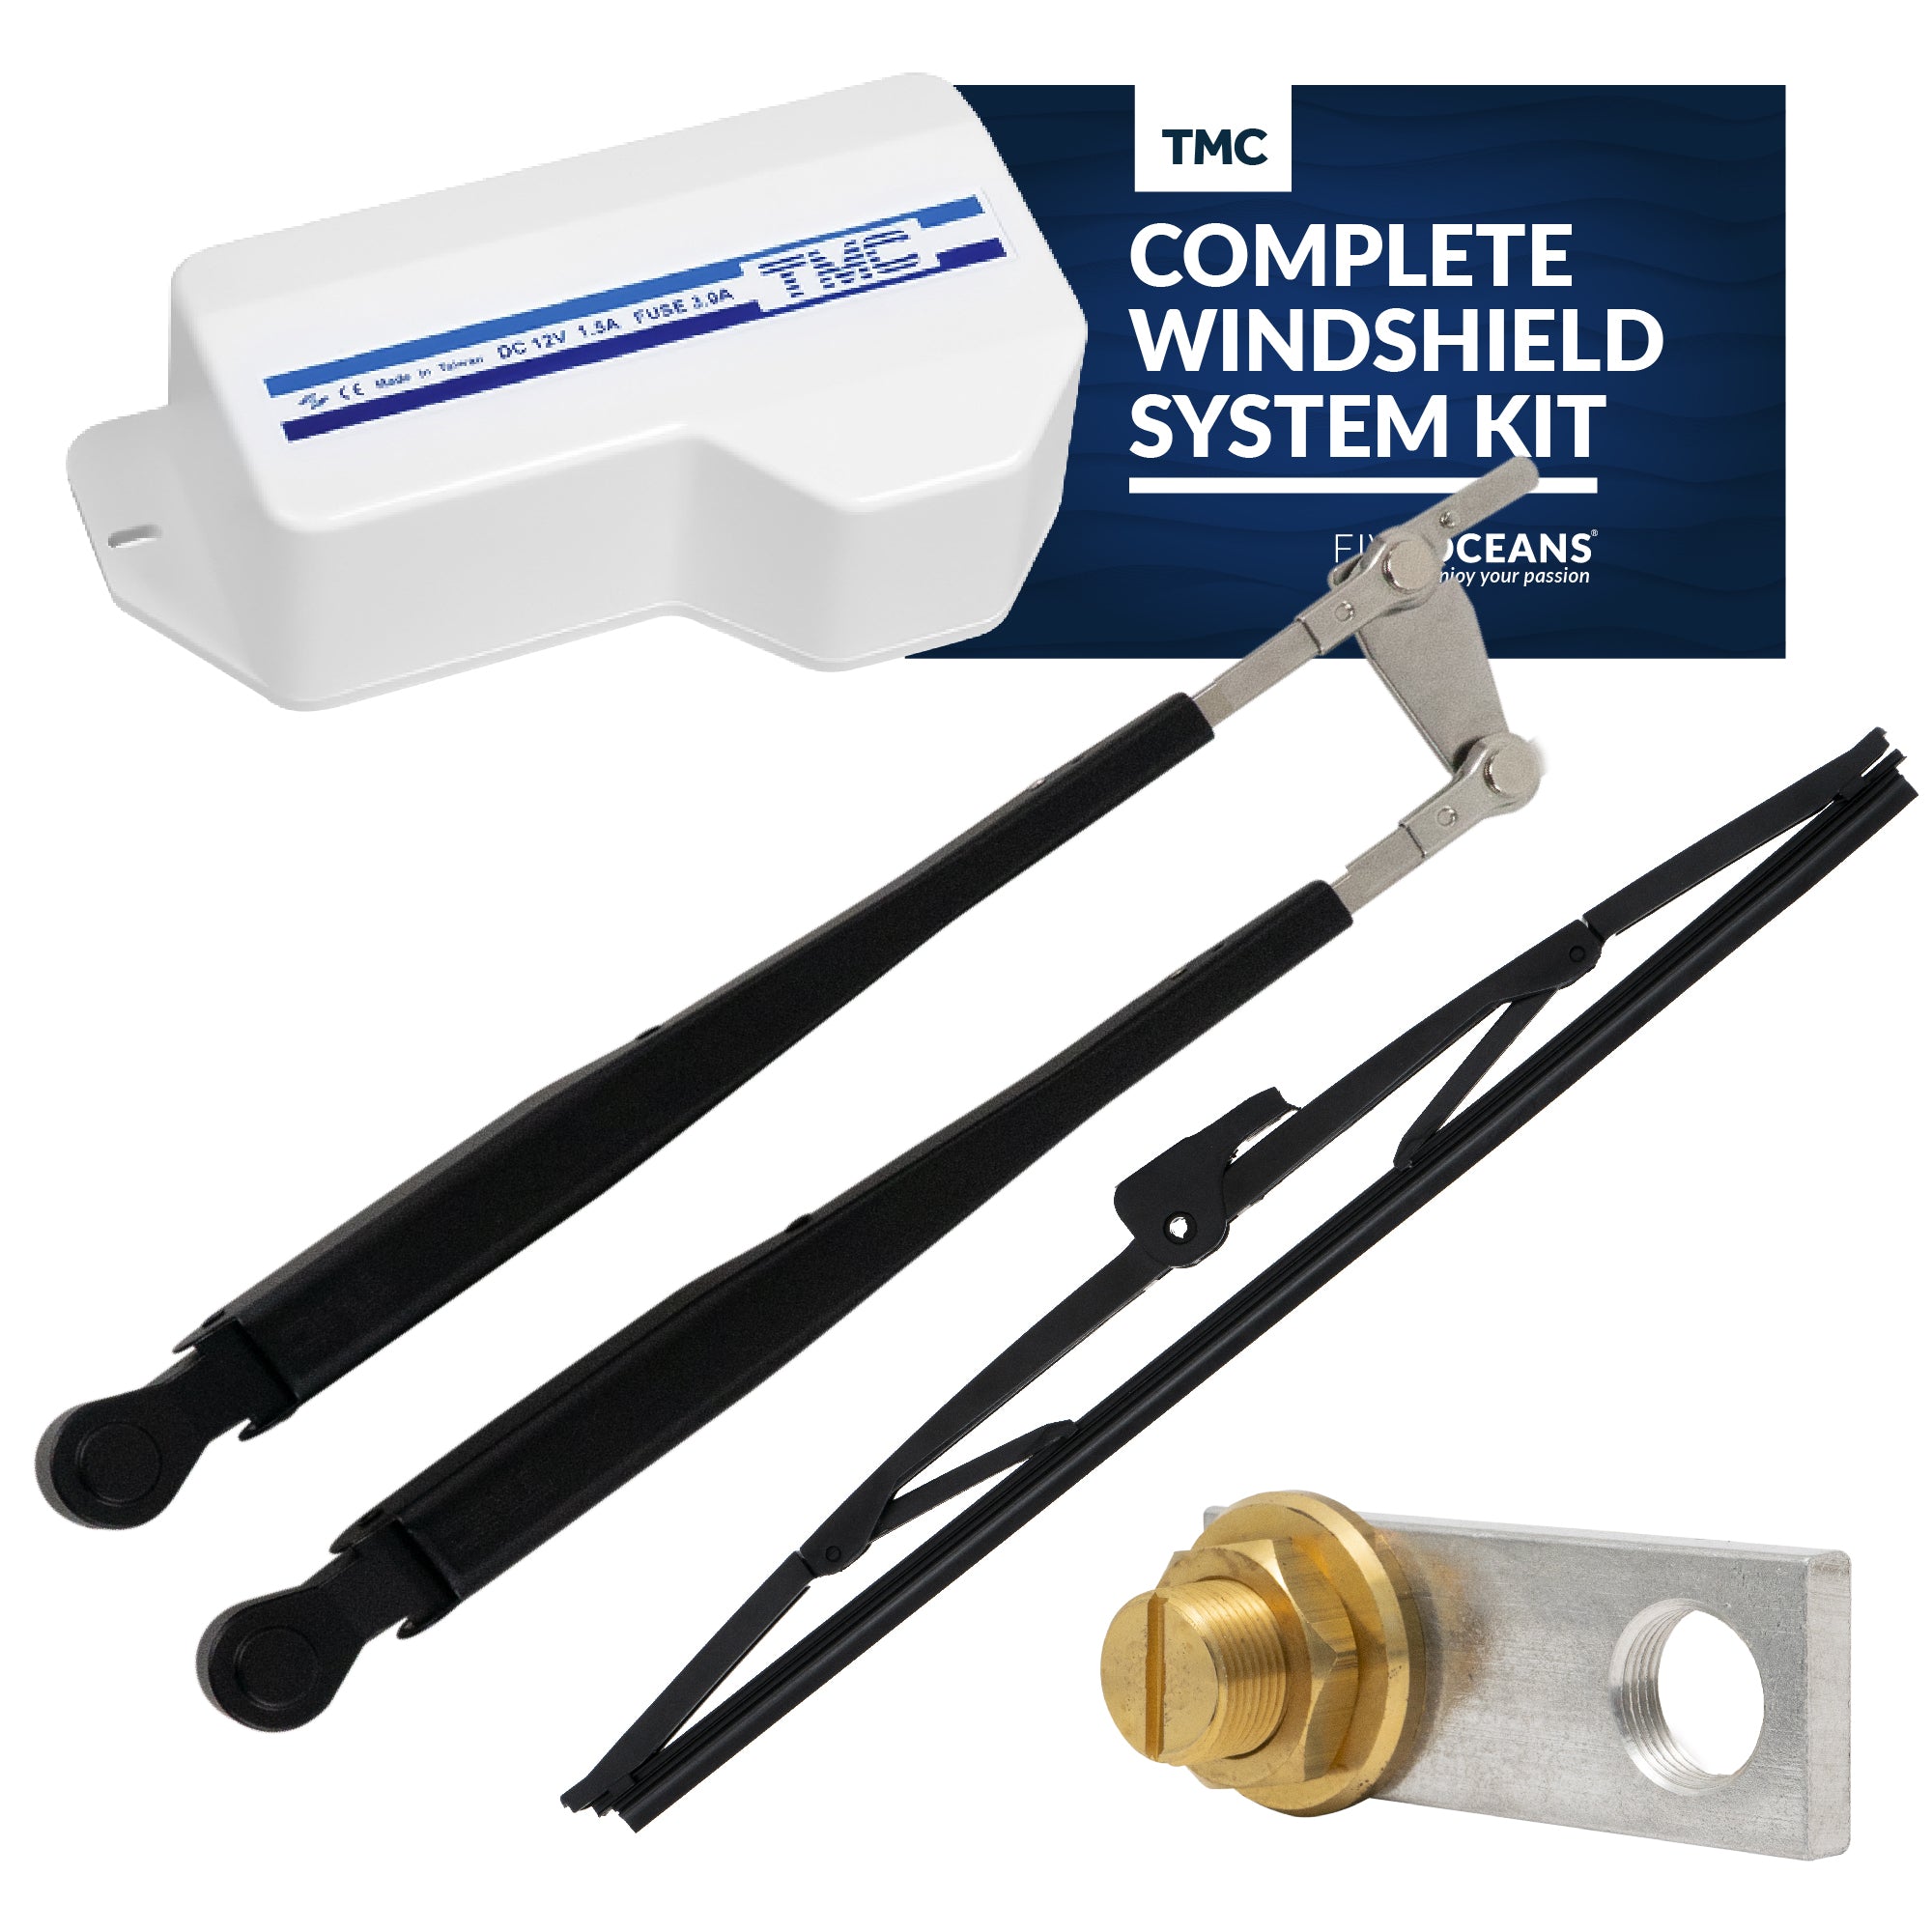 TMC Complete Windshield System Kit  - FO746-C5